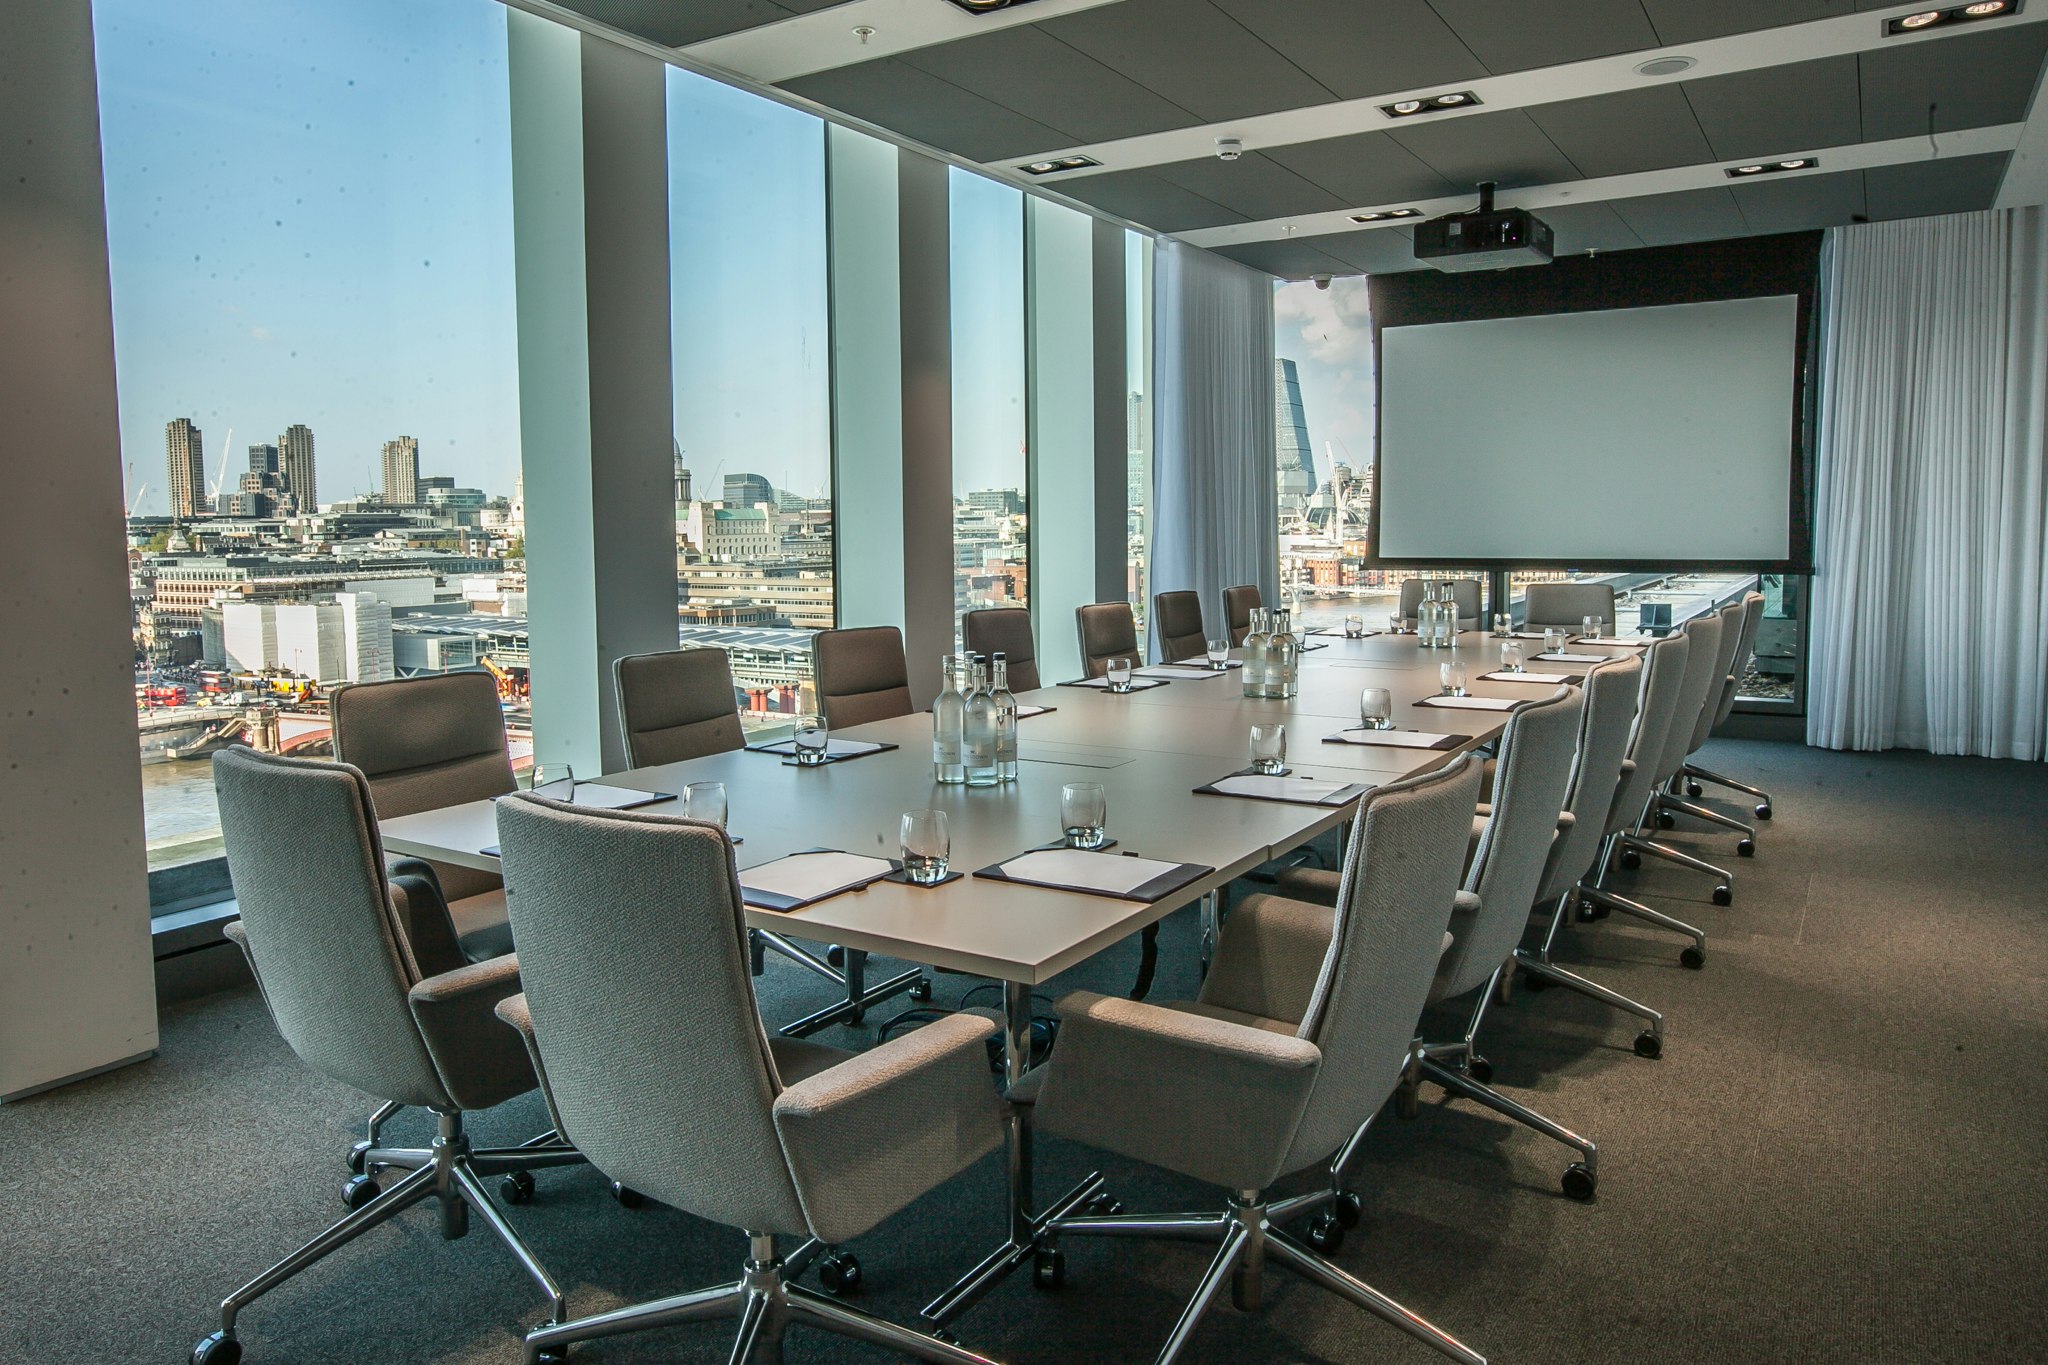 Team Away Day Ideas Venues in London - Sea Containers Events